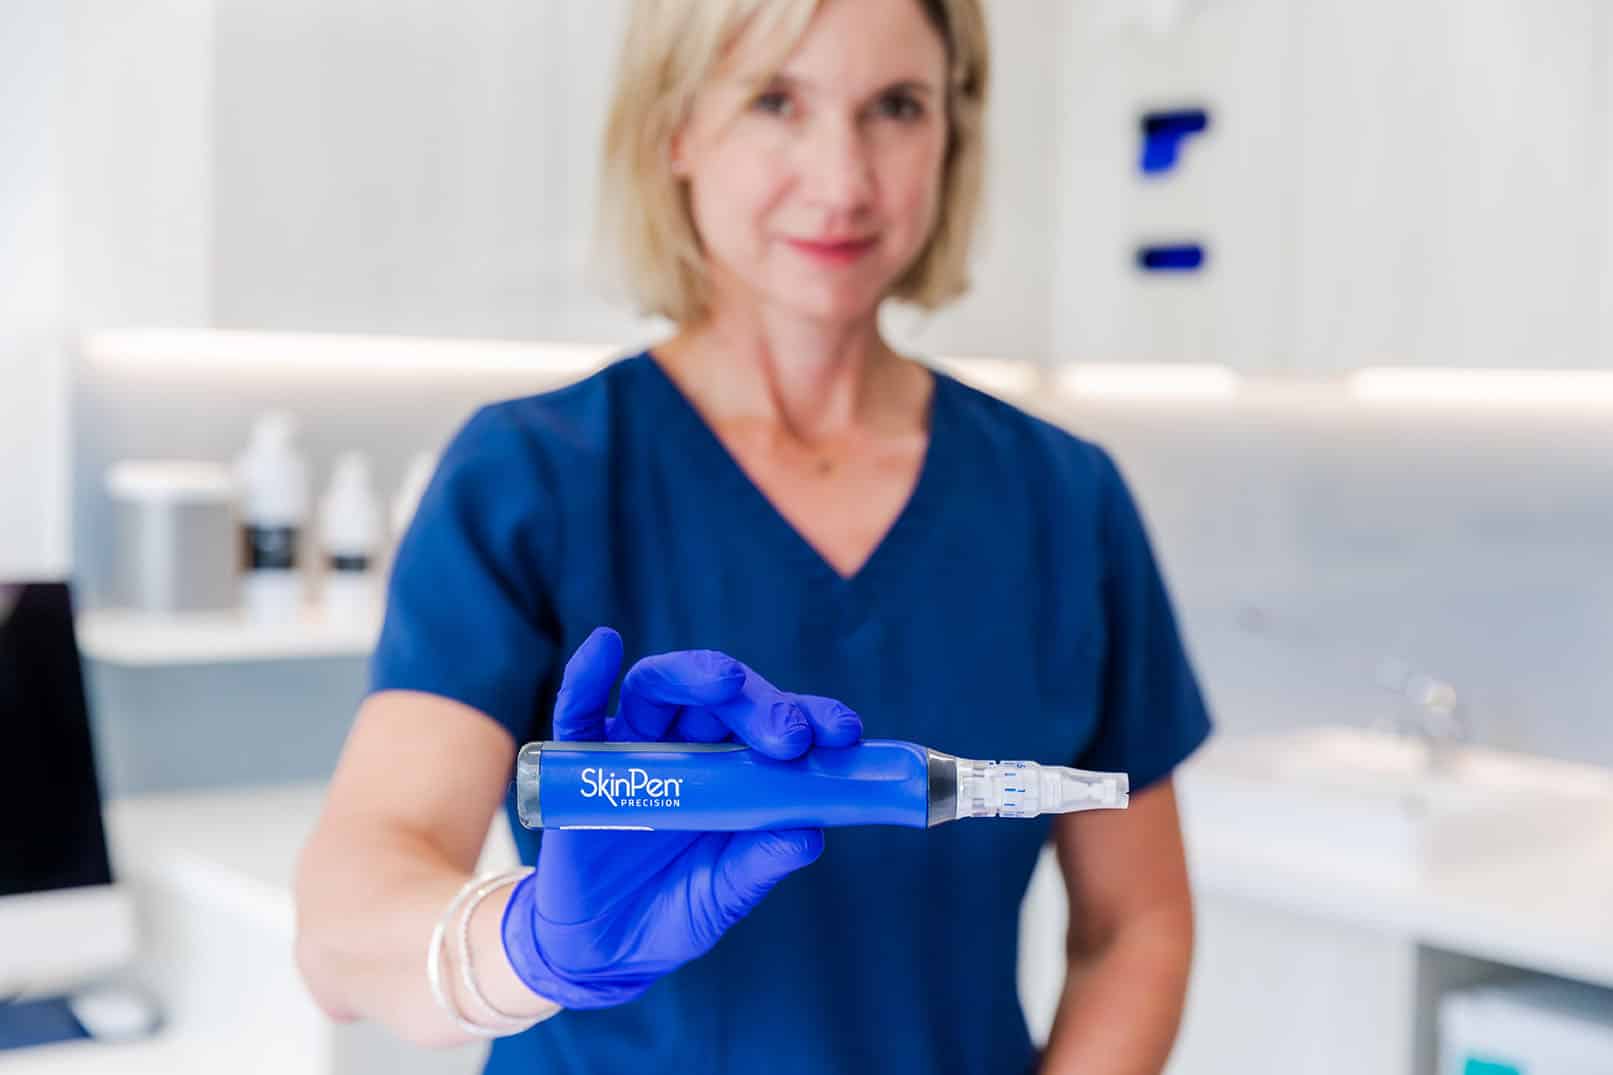 Austin Clinic staff member holding a SkinPen up to the camera